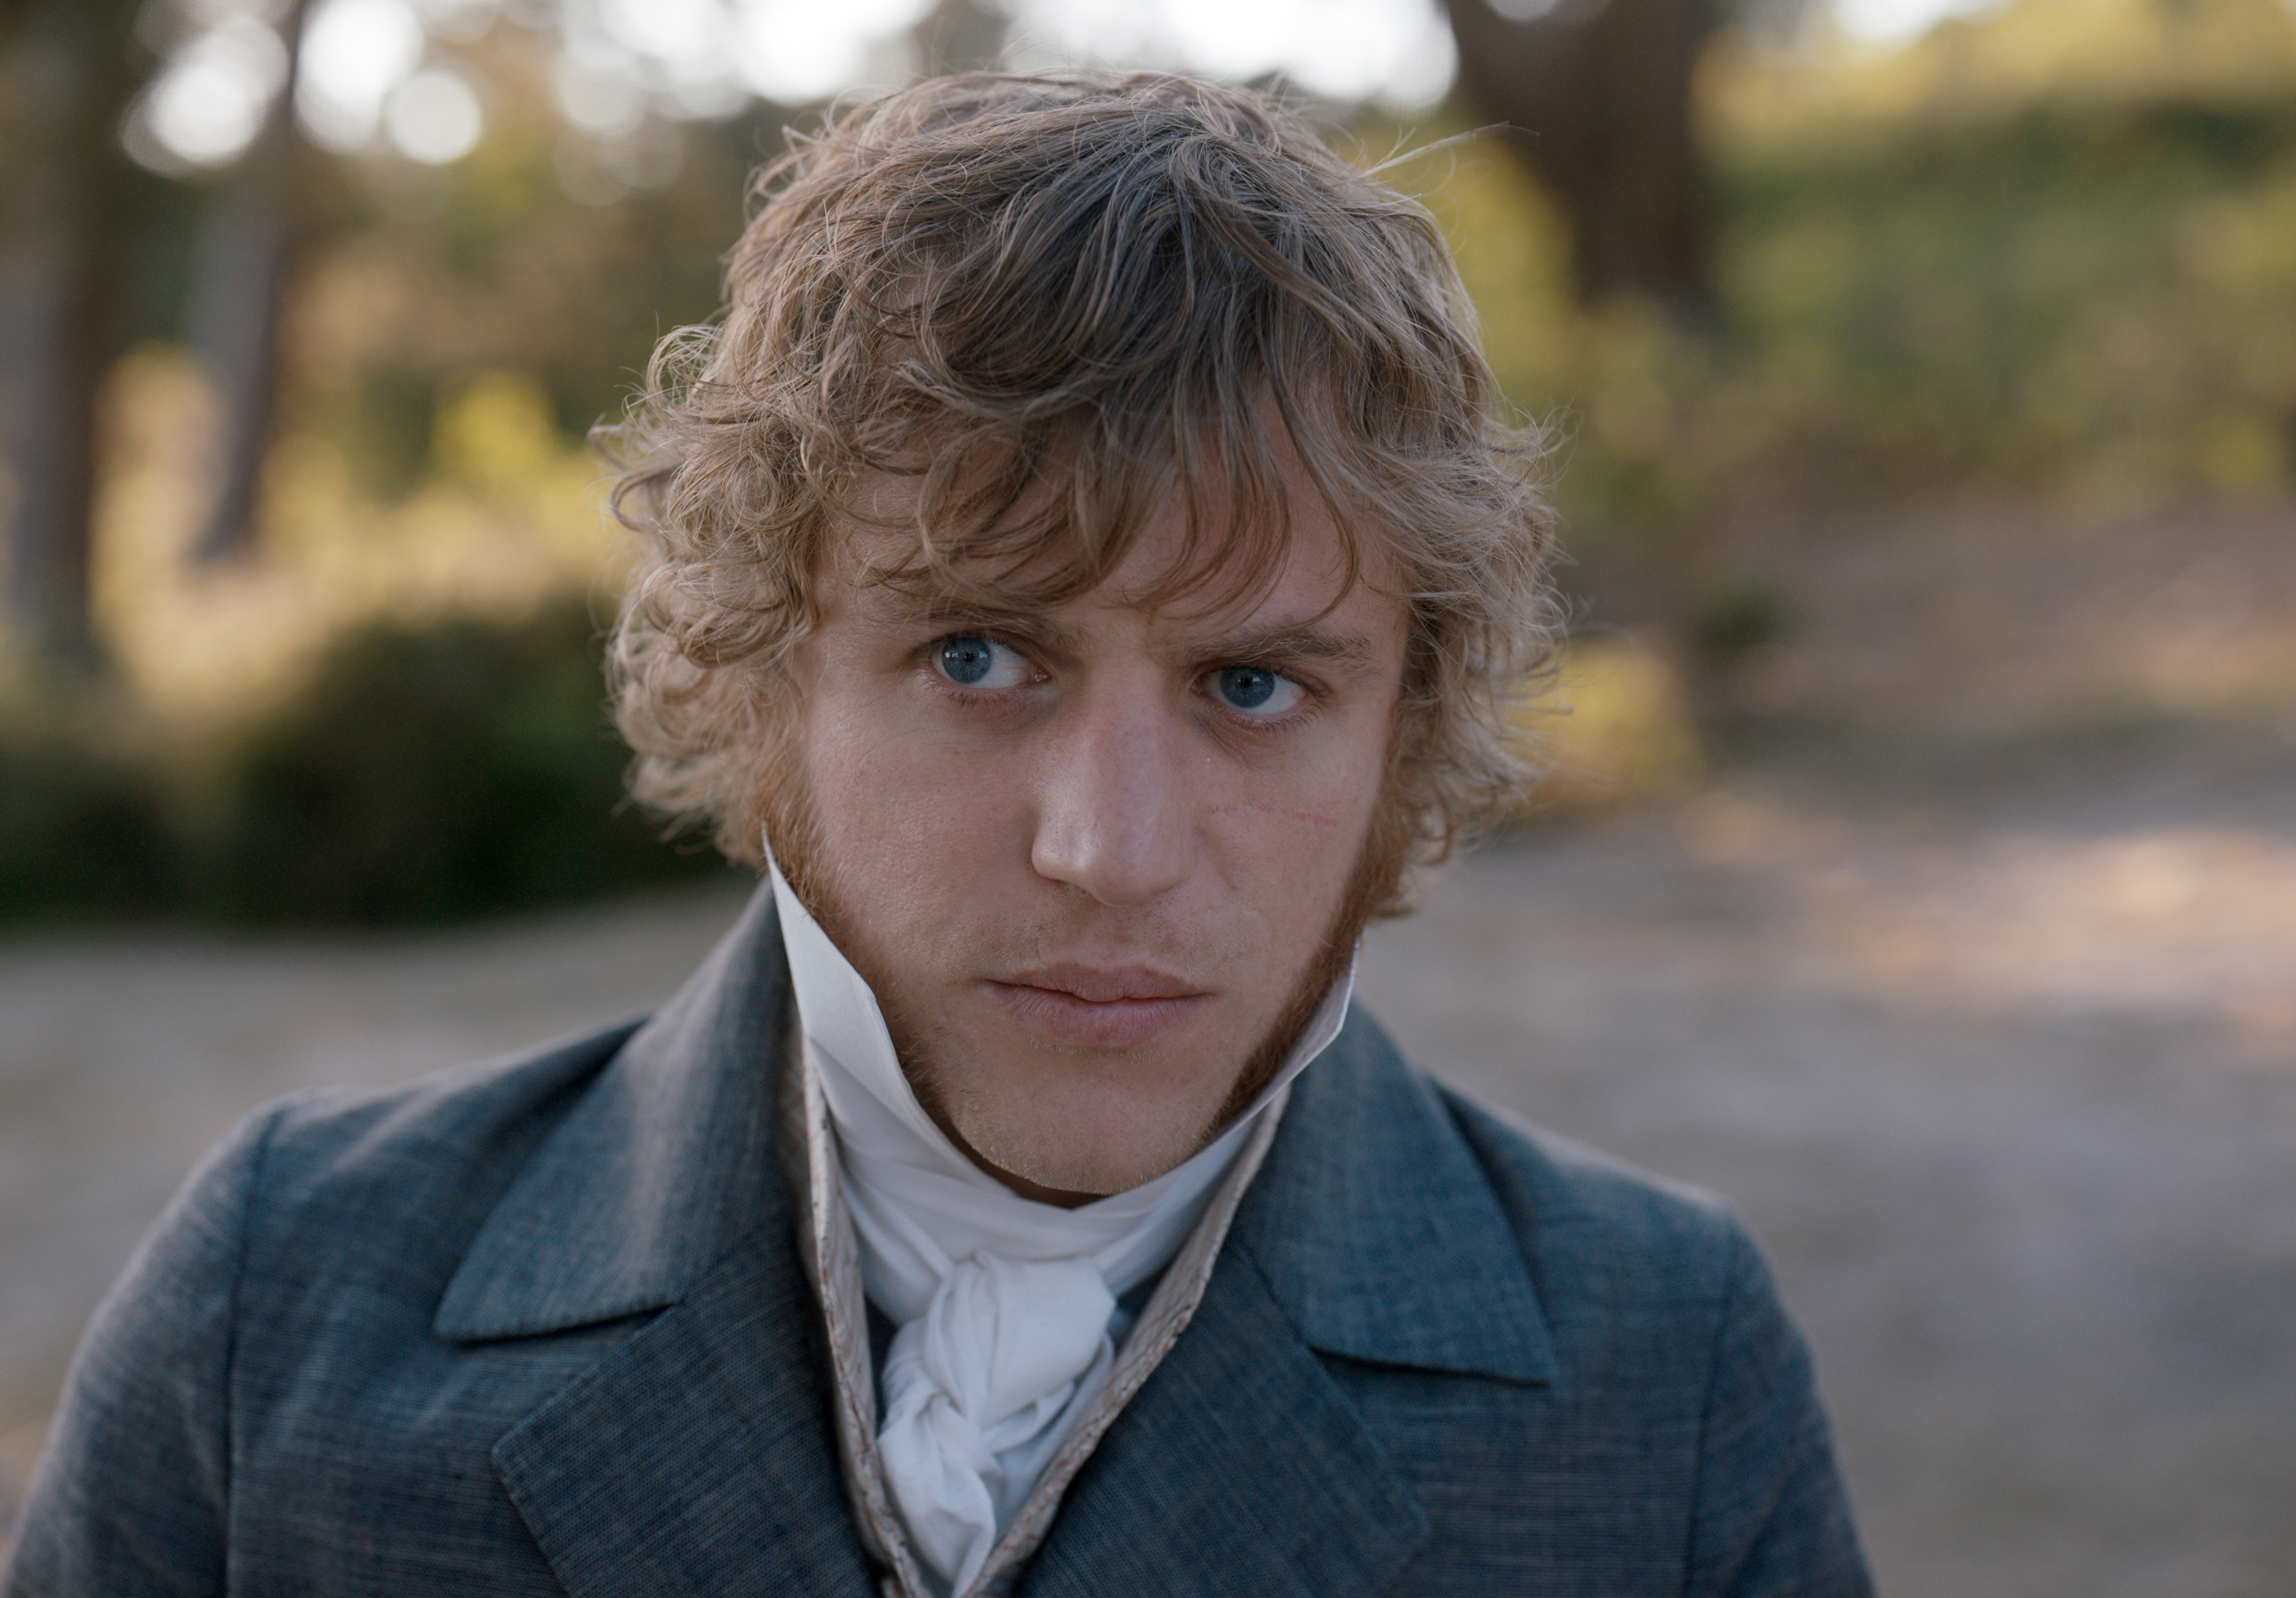 Johnny Flynn stars as "'George Knightley" in director Autumn de Wilde's EMMA, a Focus Features release. Credit : Focus Features (Courtesy of Box Hill Films—© 2019 Focus Features, LLC. All Rights Reserved)